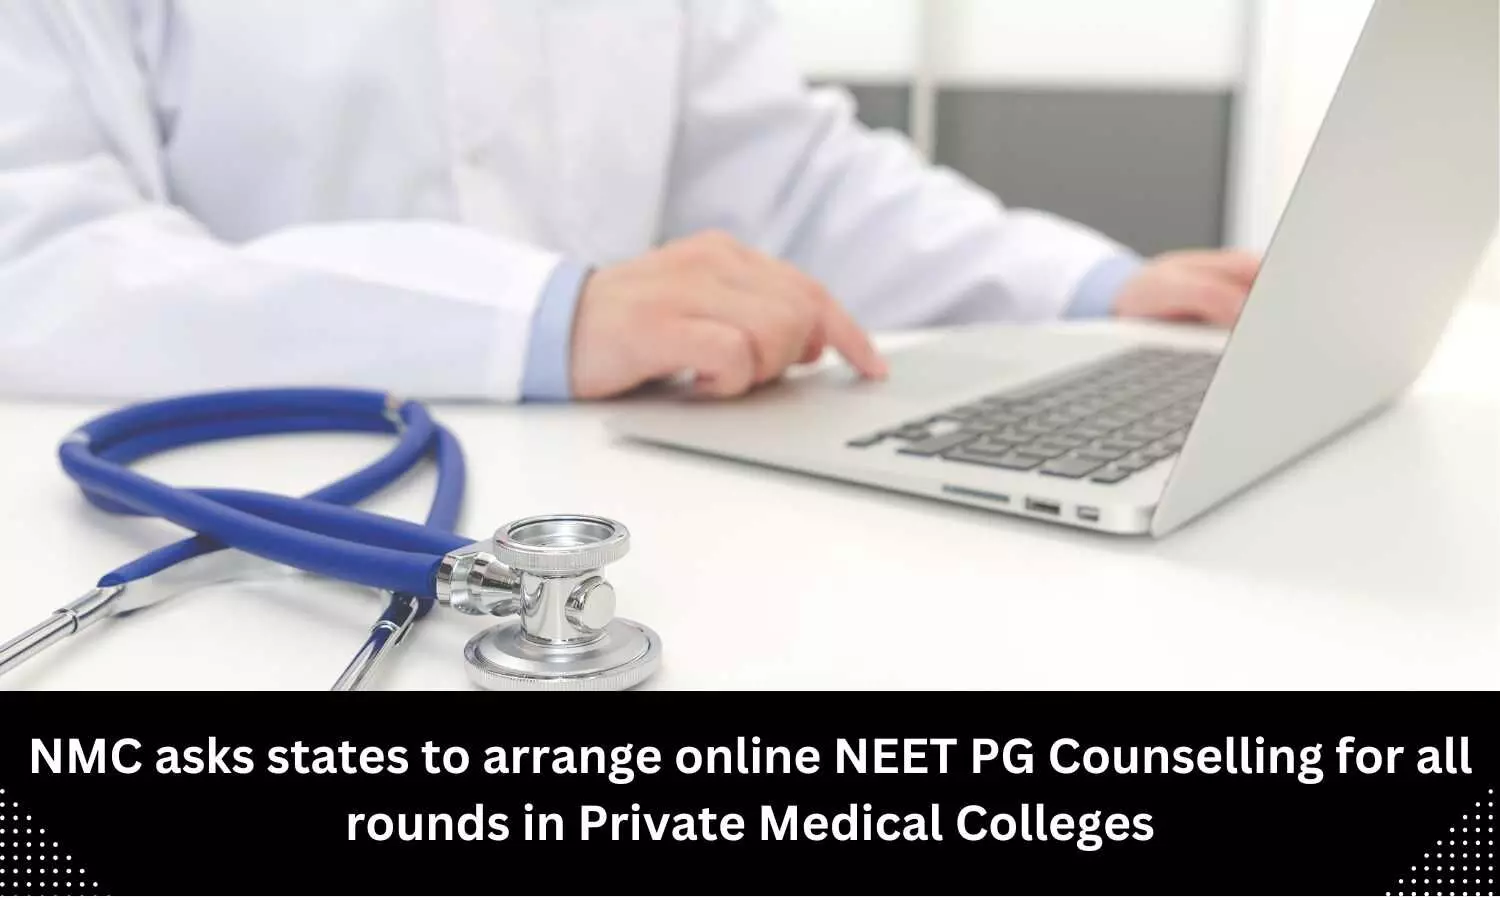 Arrange online NEET PG Counselling for all rounds including stray vacancy round in Private Medical Colleges: NMC directs States